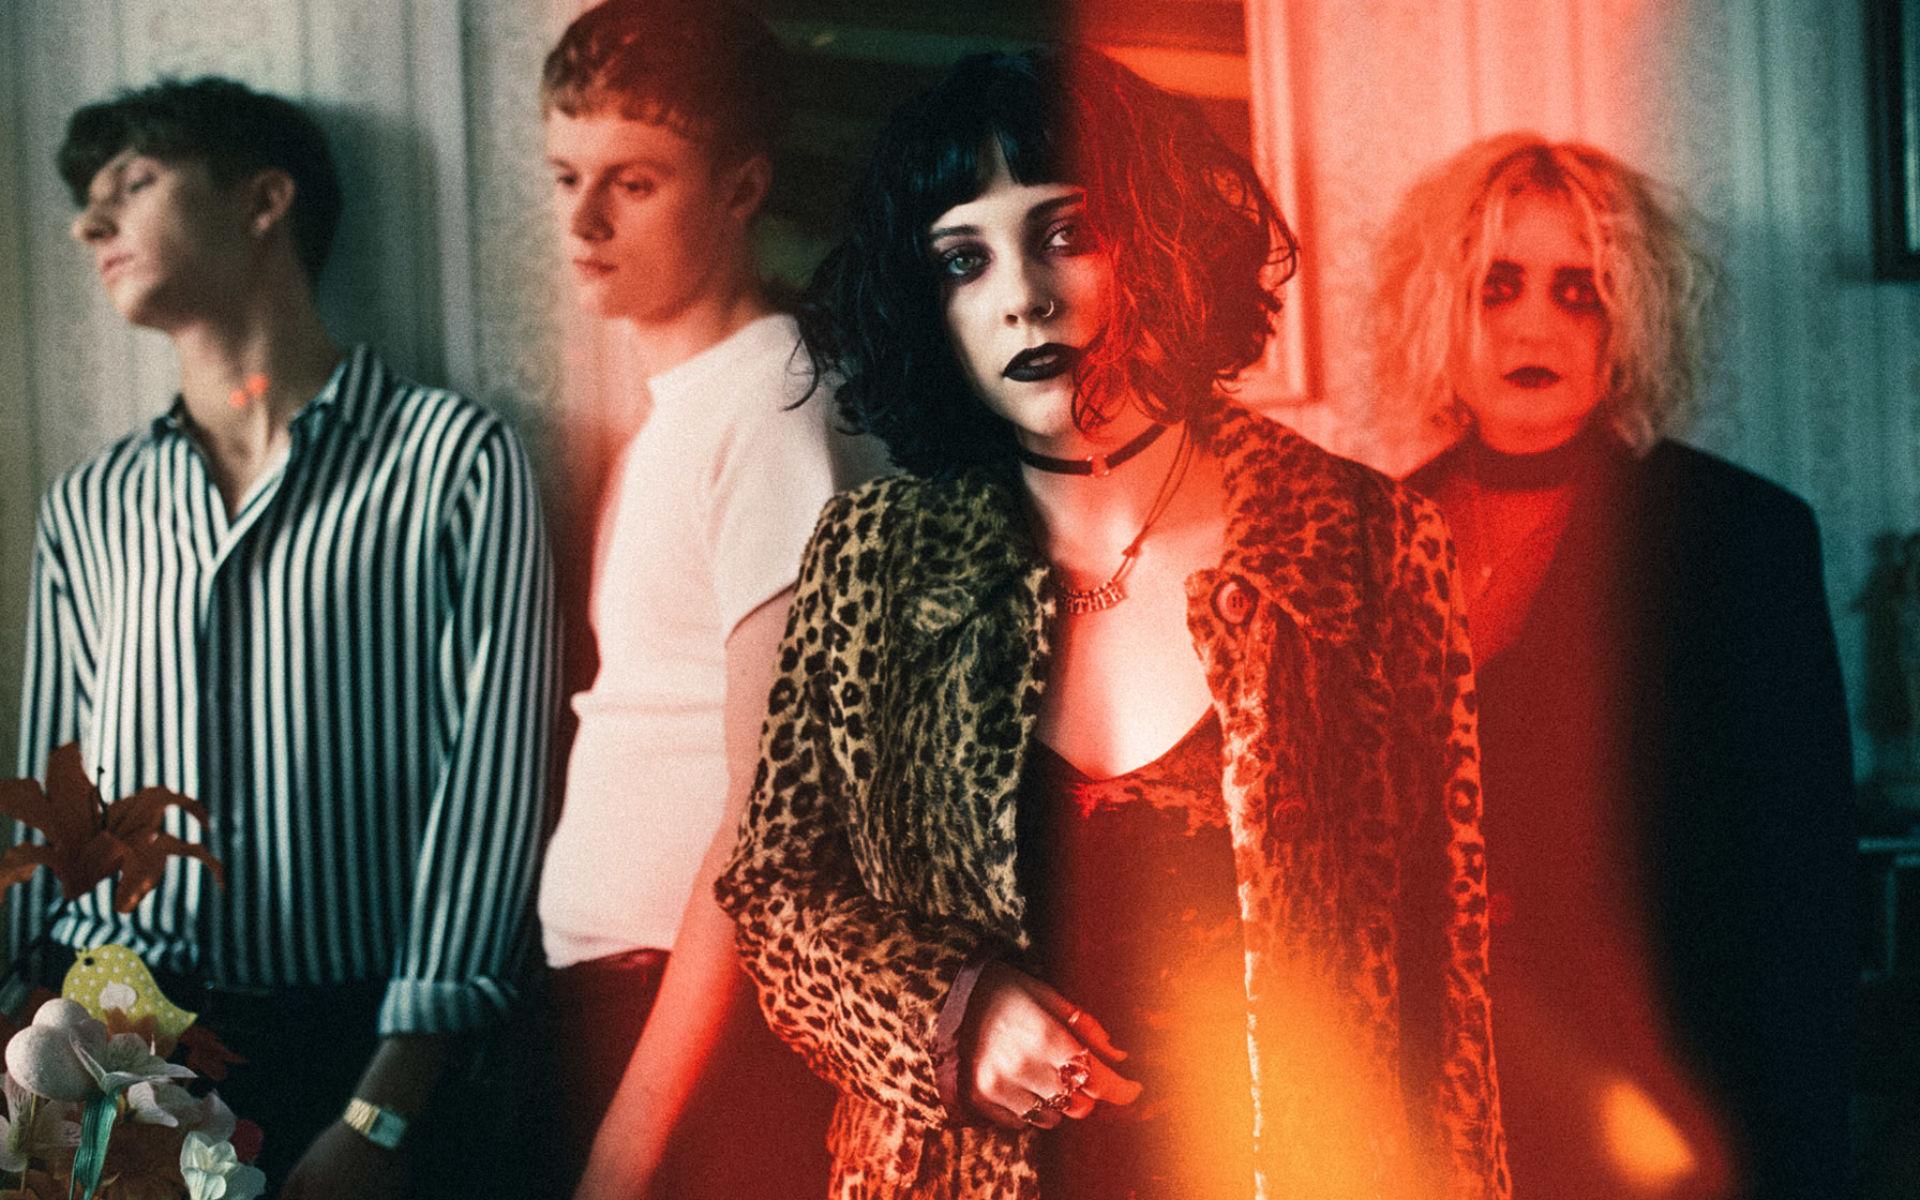 Pale Waves, Miya Folick, and The Candescents